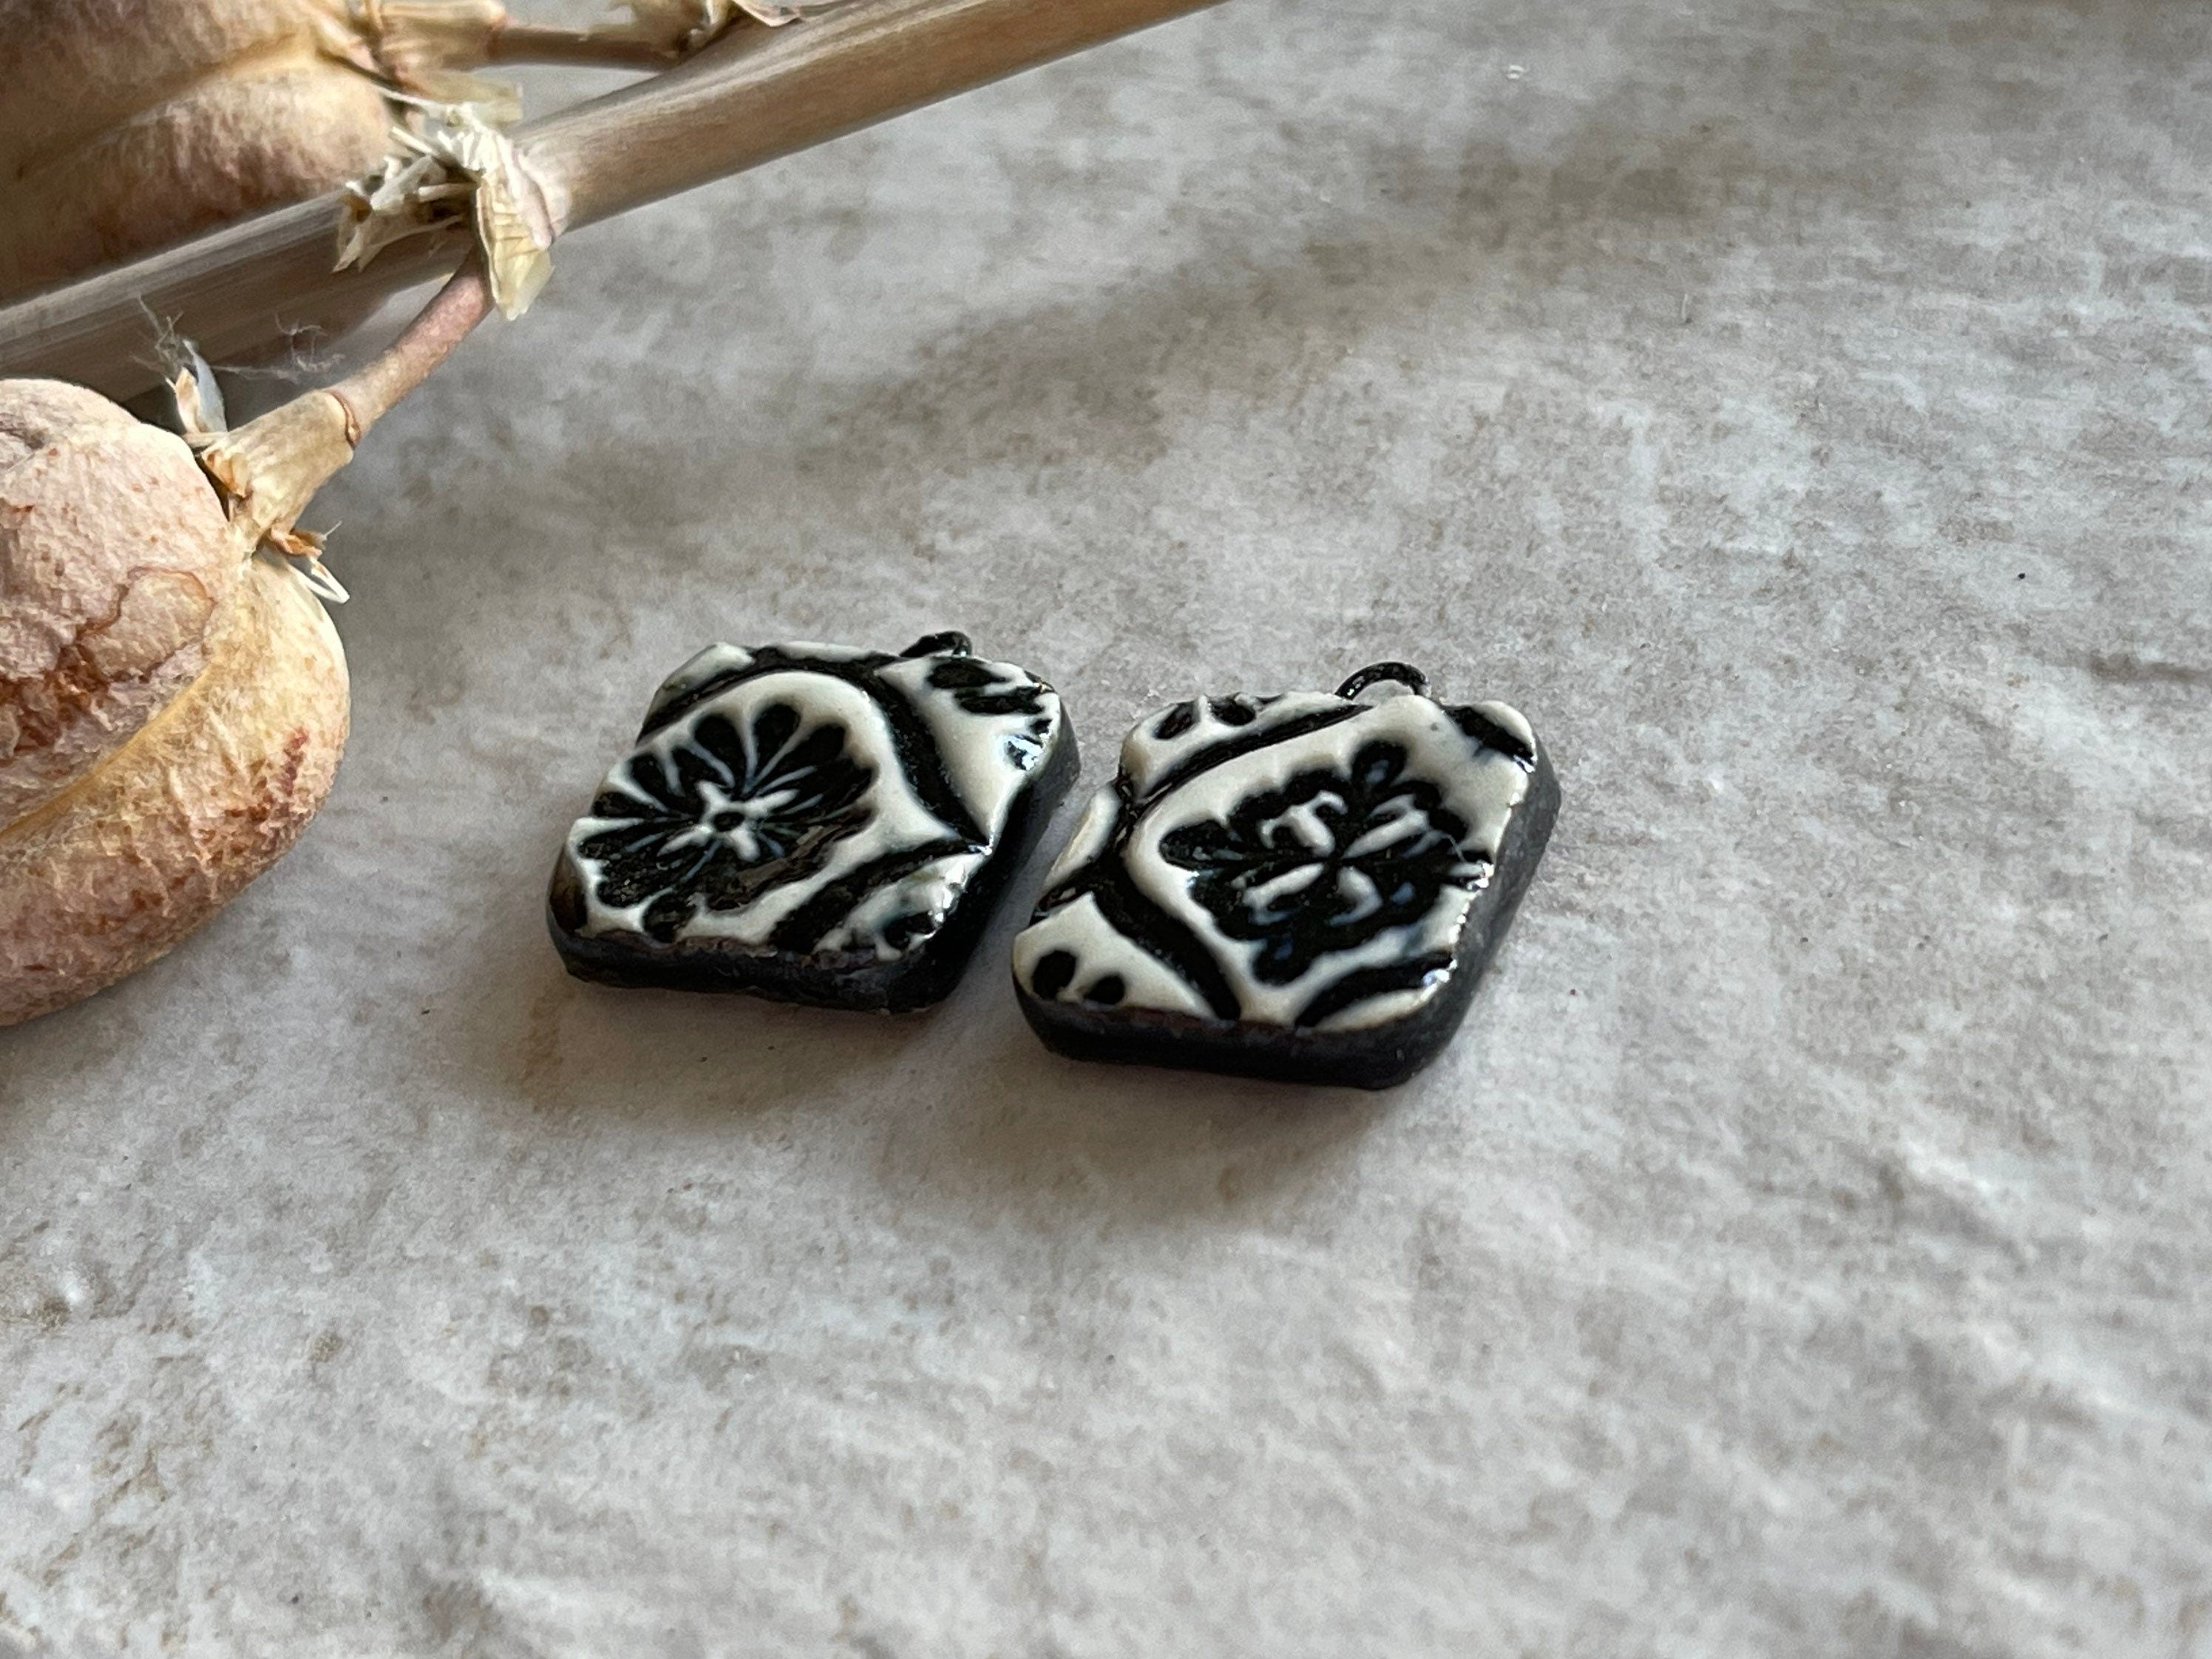 Black and White Italian Tile, Black Earring Bead Pair, Porcelain Ceramic Charms, Jewelry Making Components, Beading Handmade